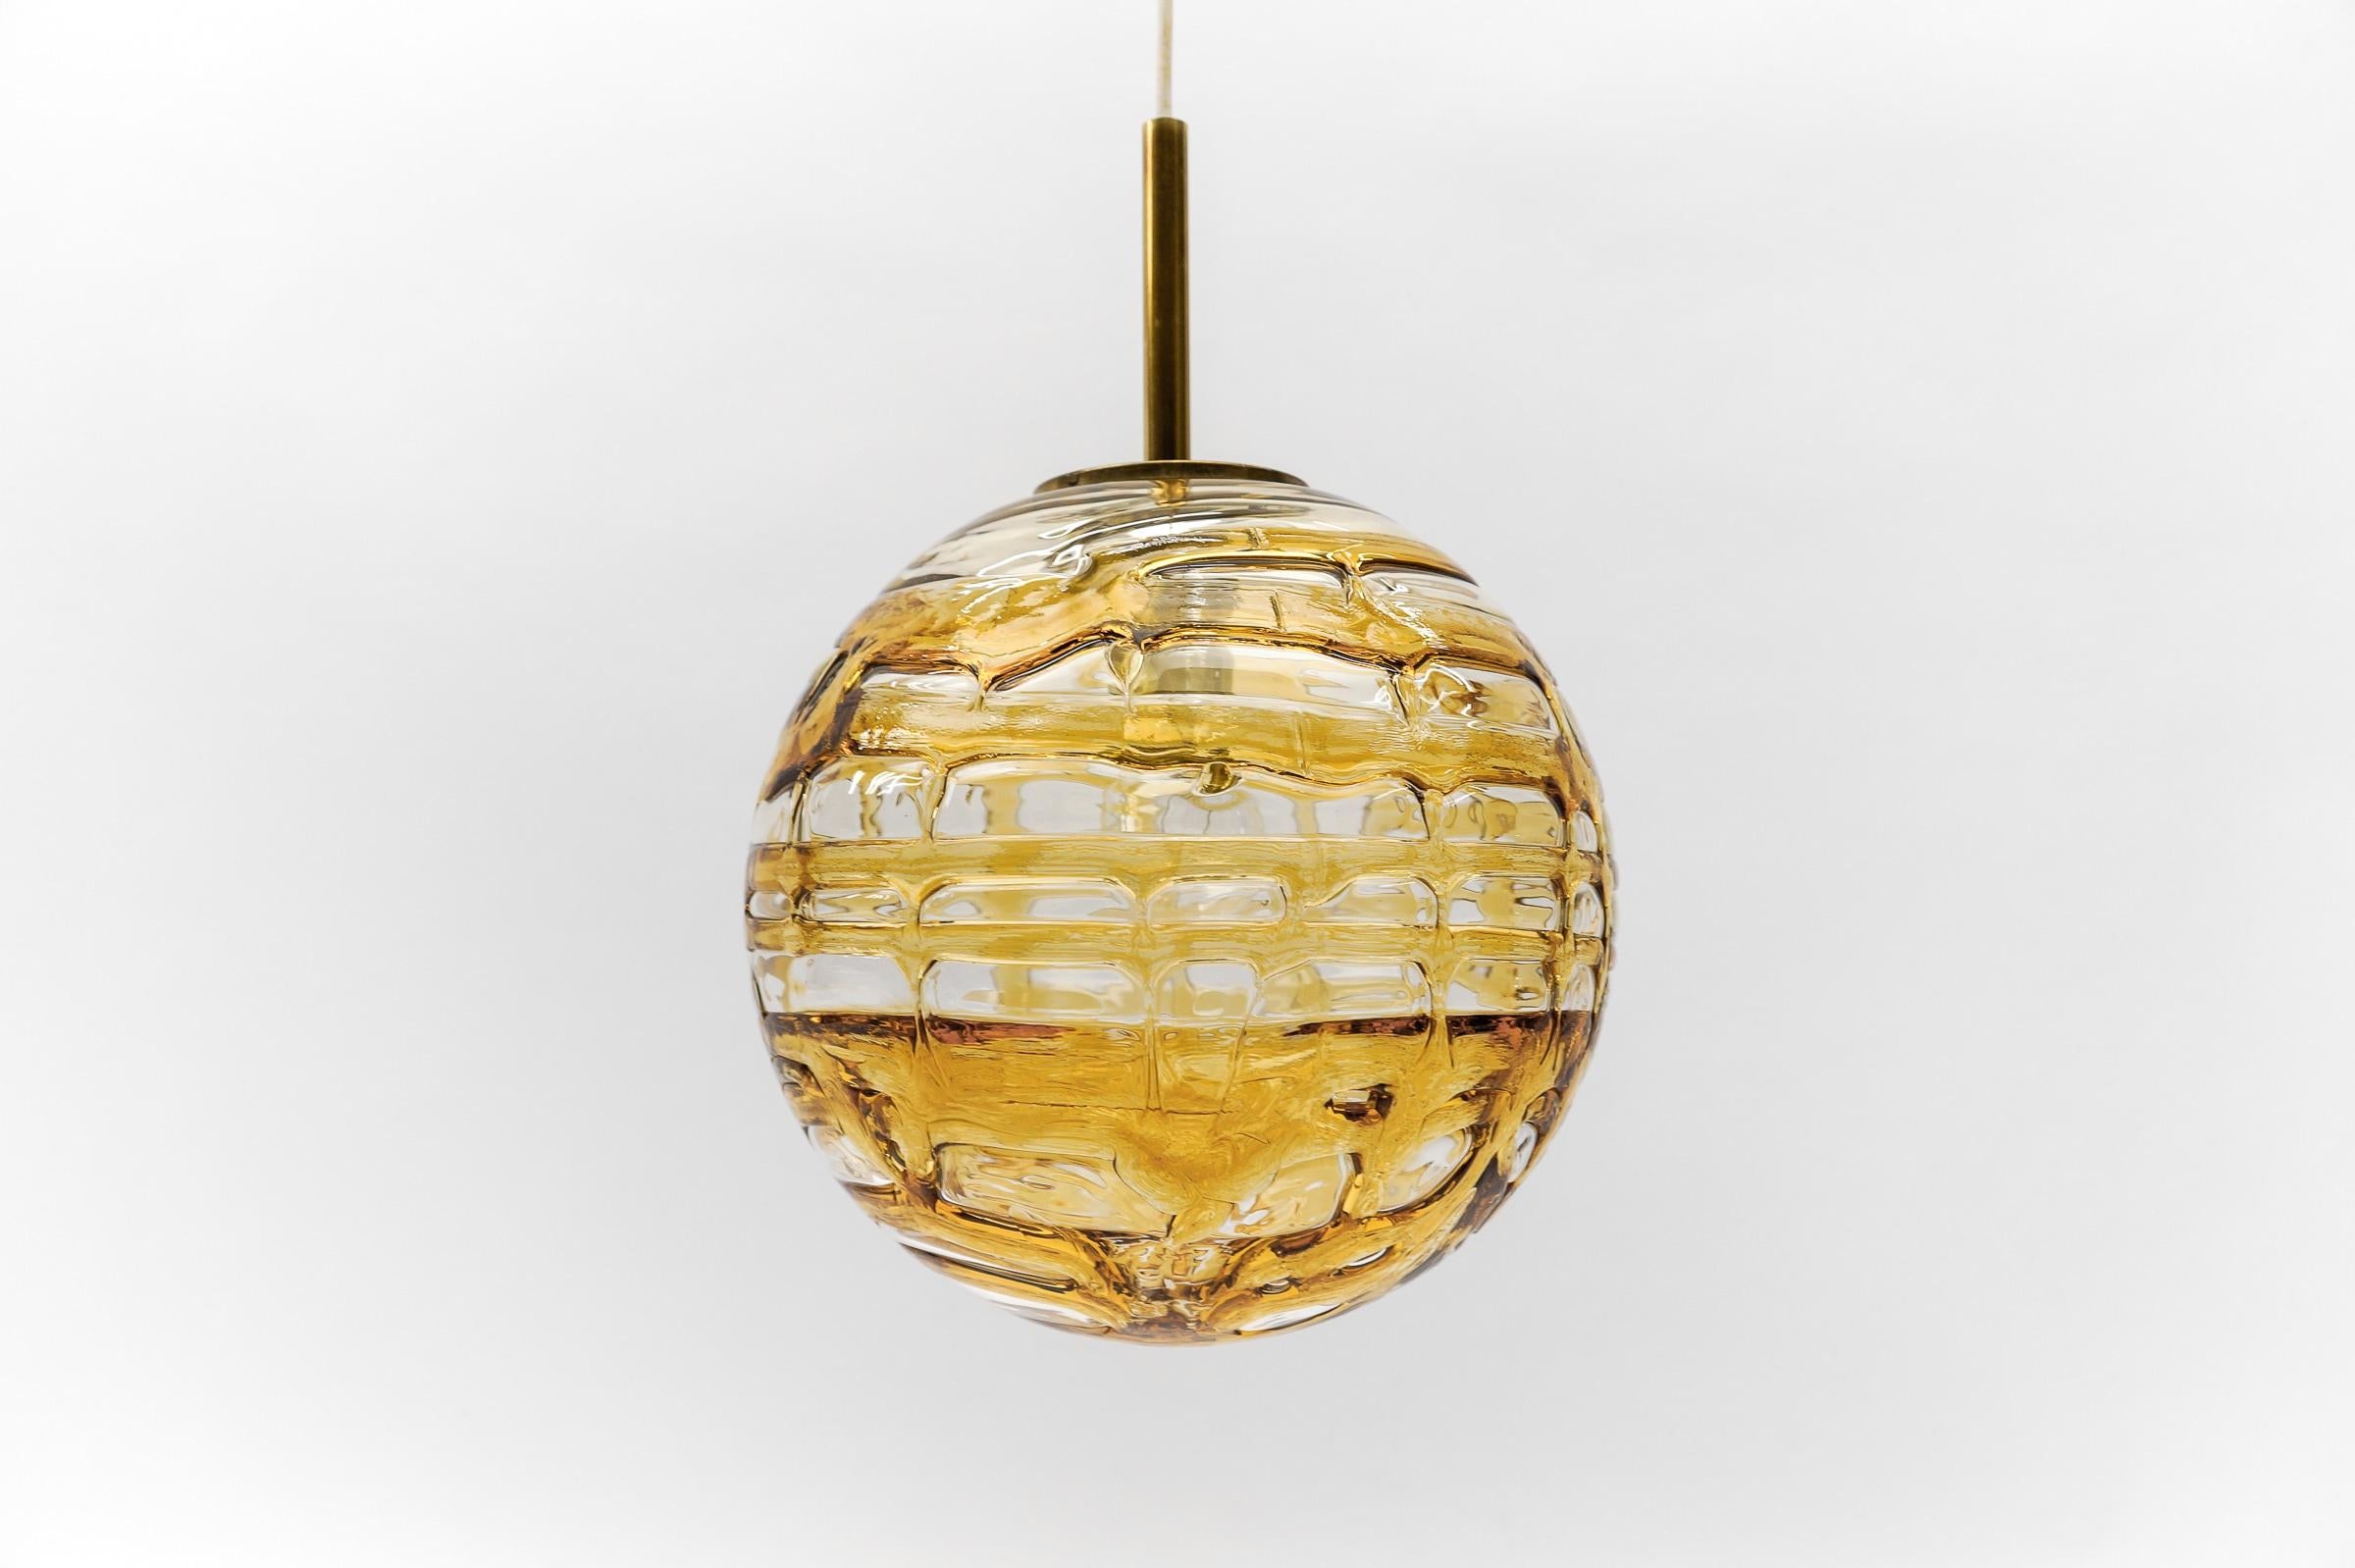 Beautiful Yellow Murano Glass Ball Pendant Lamp by Doria, - 1960s Germany For Sale 3